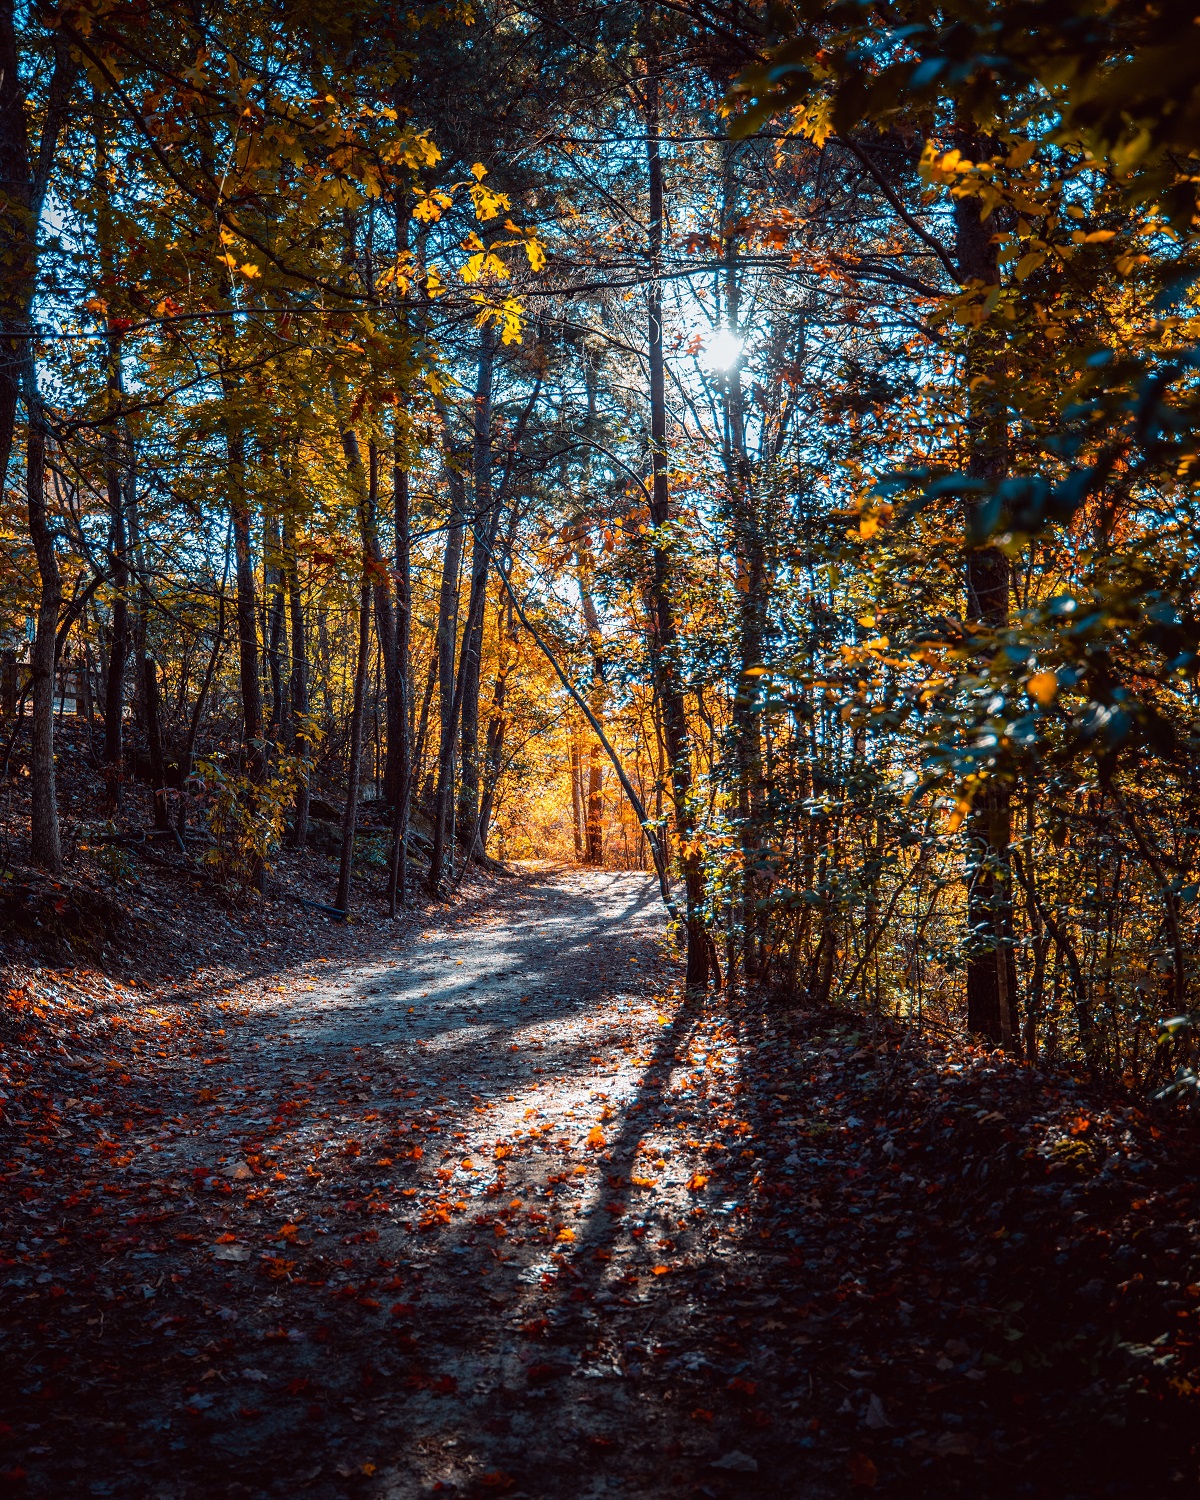 A forest trail in fall with the sun filtering through the trees